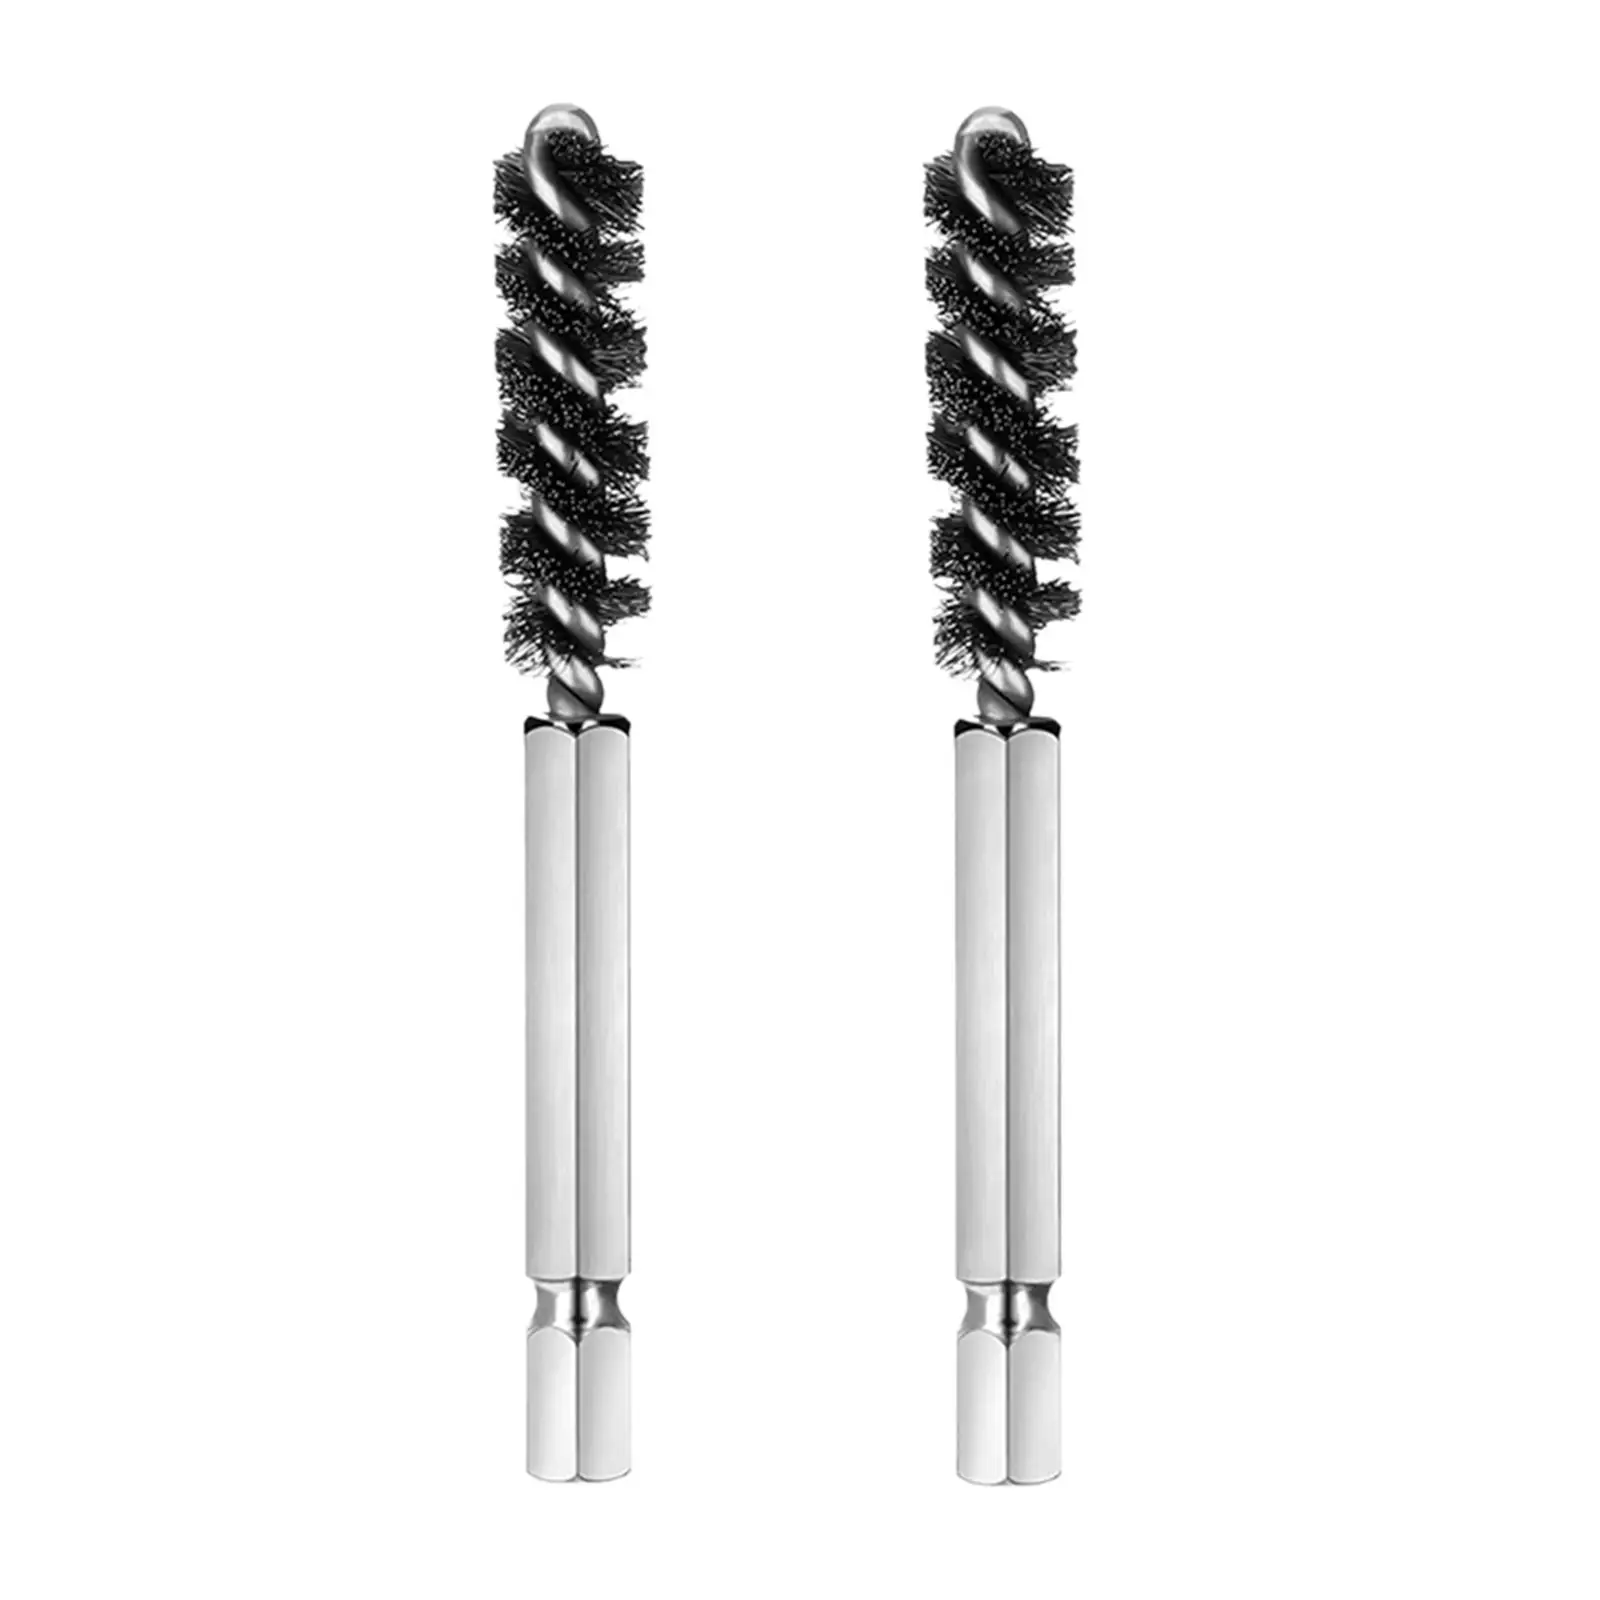 2x Accs Durable Multipurpose Electric Drill Cleaning Tool Bore Brush Argent Golf